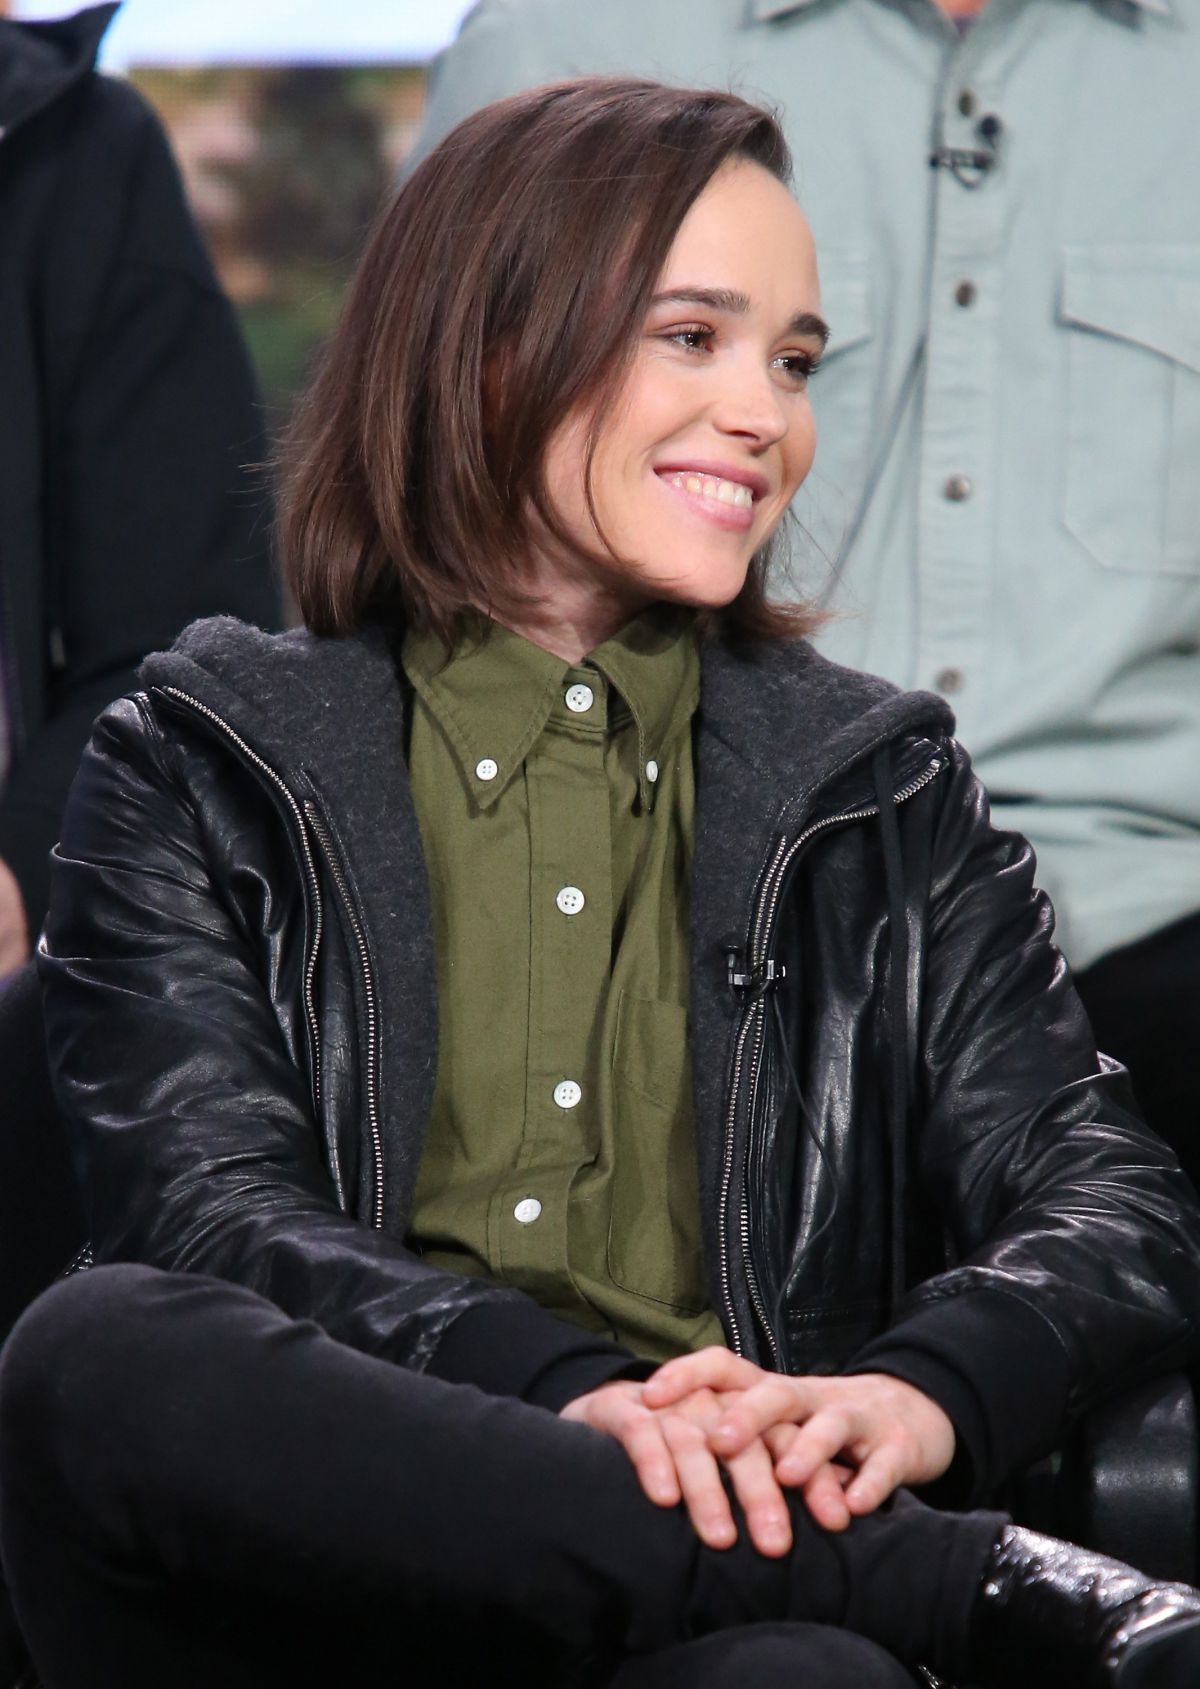 ellen-page-at-viceland-panel-at-2016-winter-tca-tour-in-pasadena-01-06